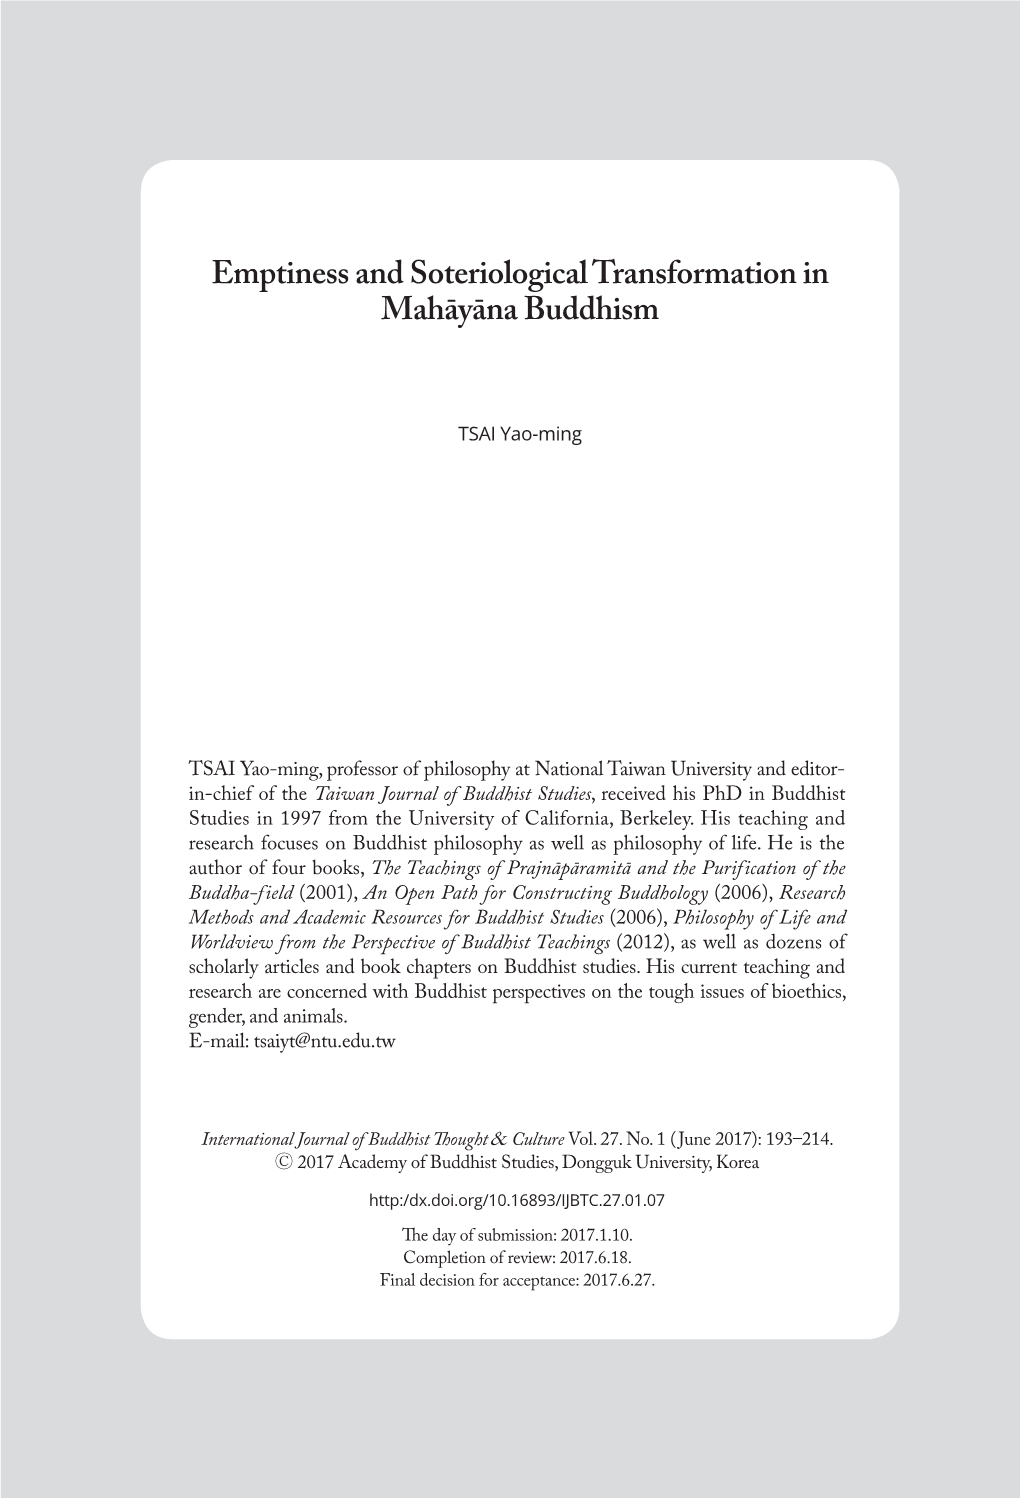 Emptiness and Soteriological Transformation in Mahāyāna Buddhism